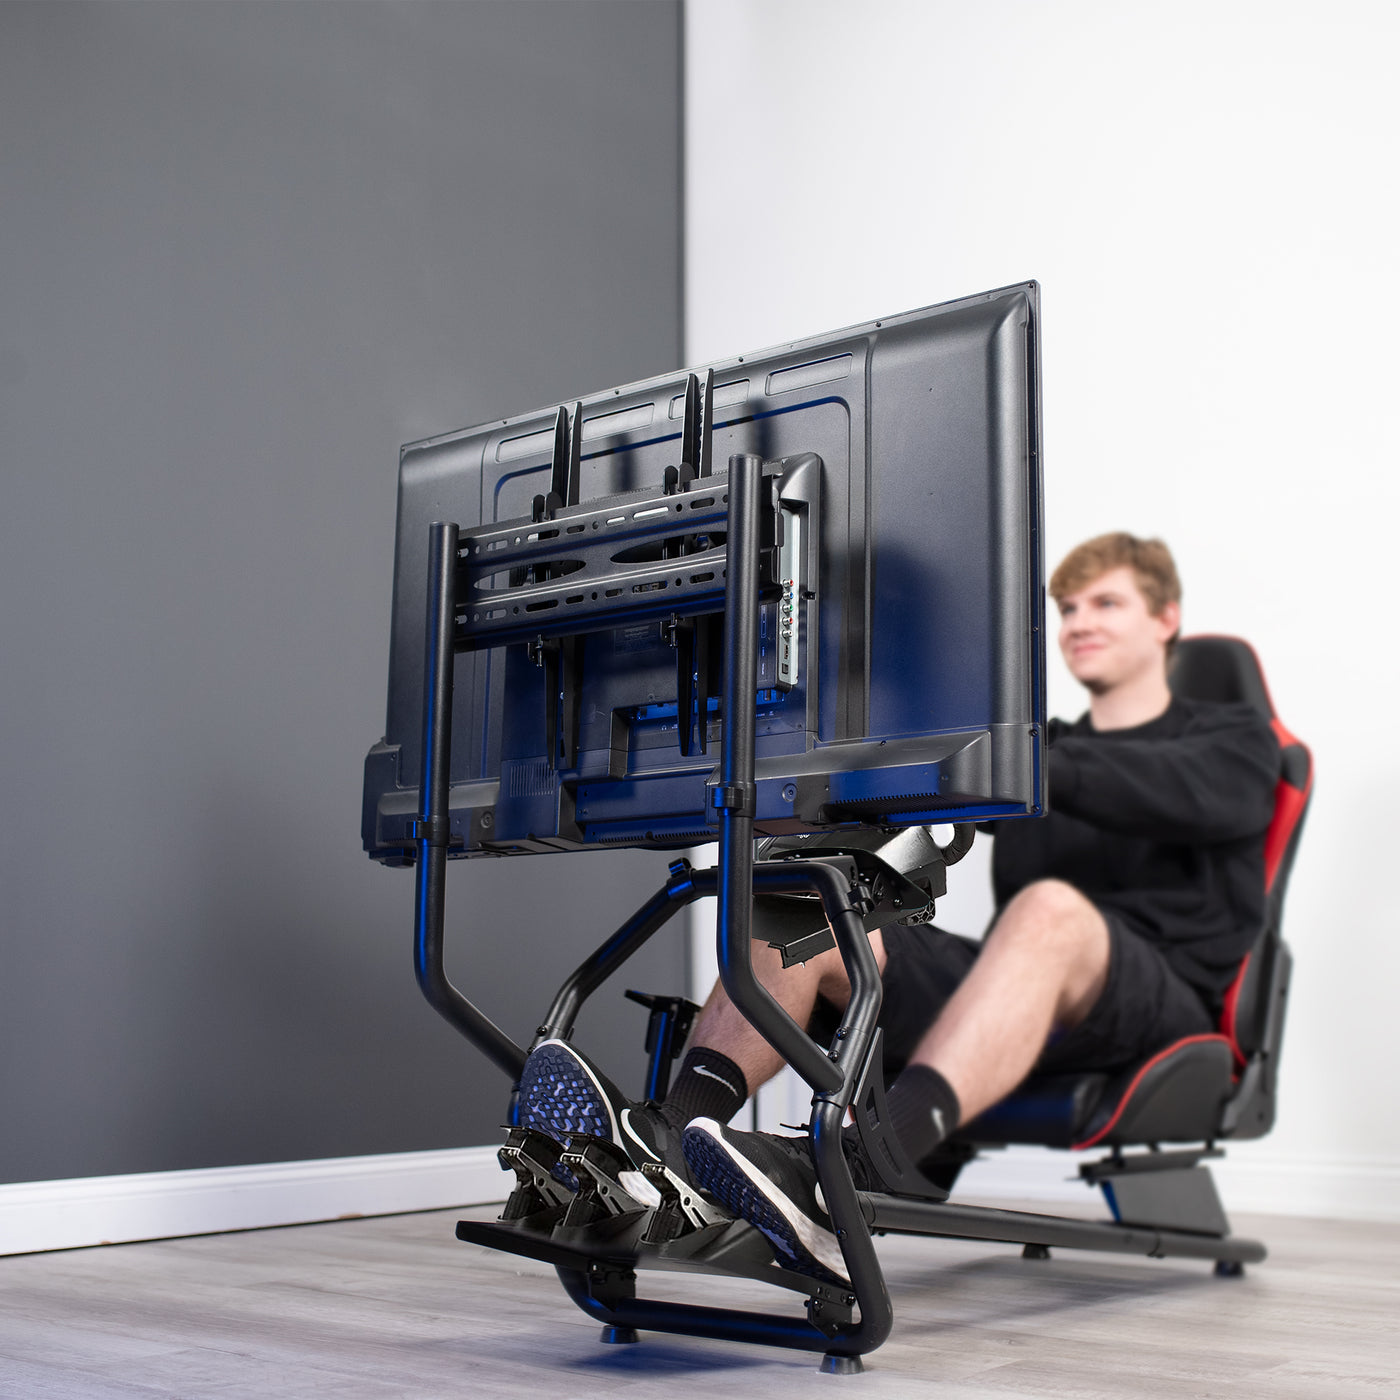 Elevate your gaming monitor to a comfortable viewing height from cockpit chair.